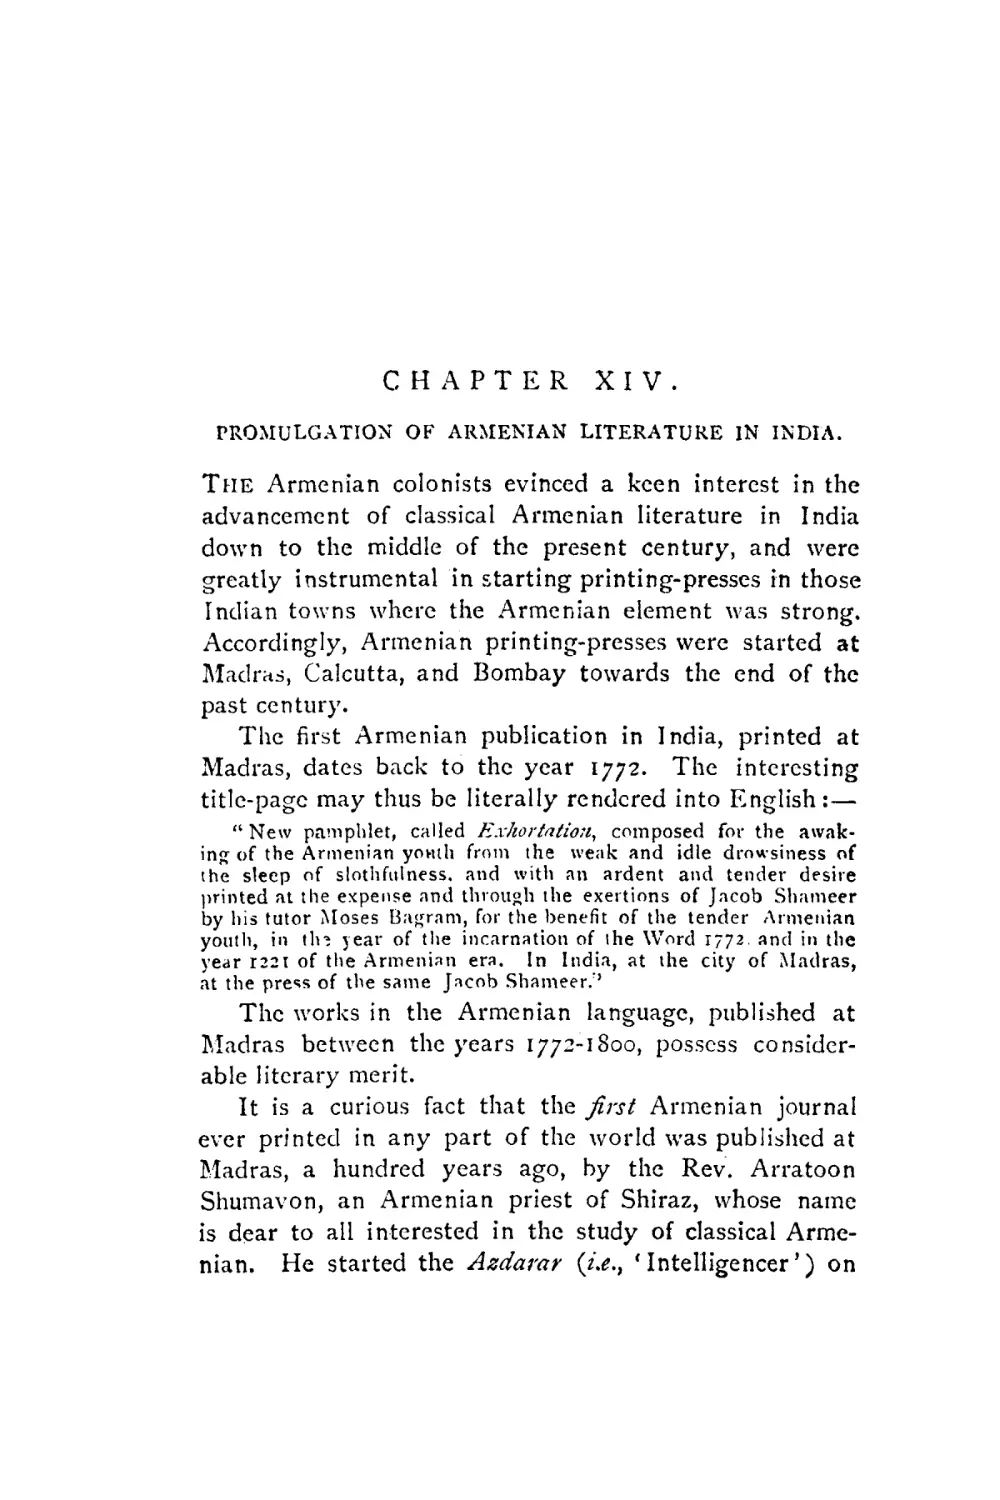 CHAPTER XIV . PROMULGATION OF ARMENIAN LITERATURE IN INDIA